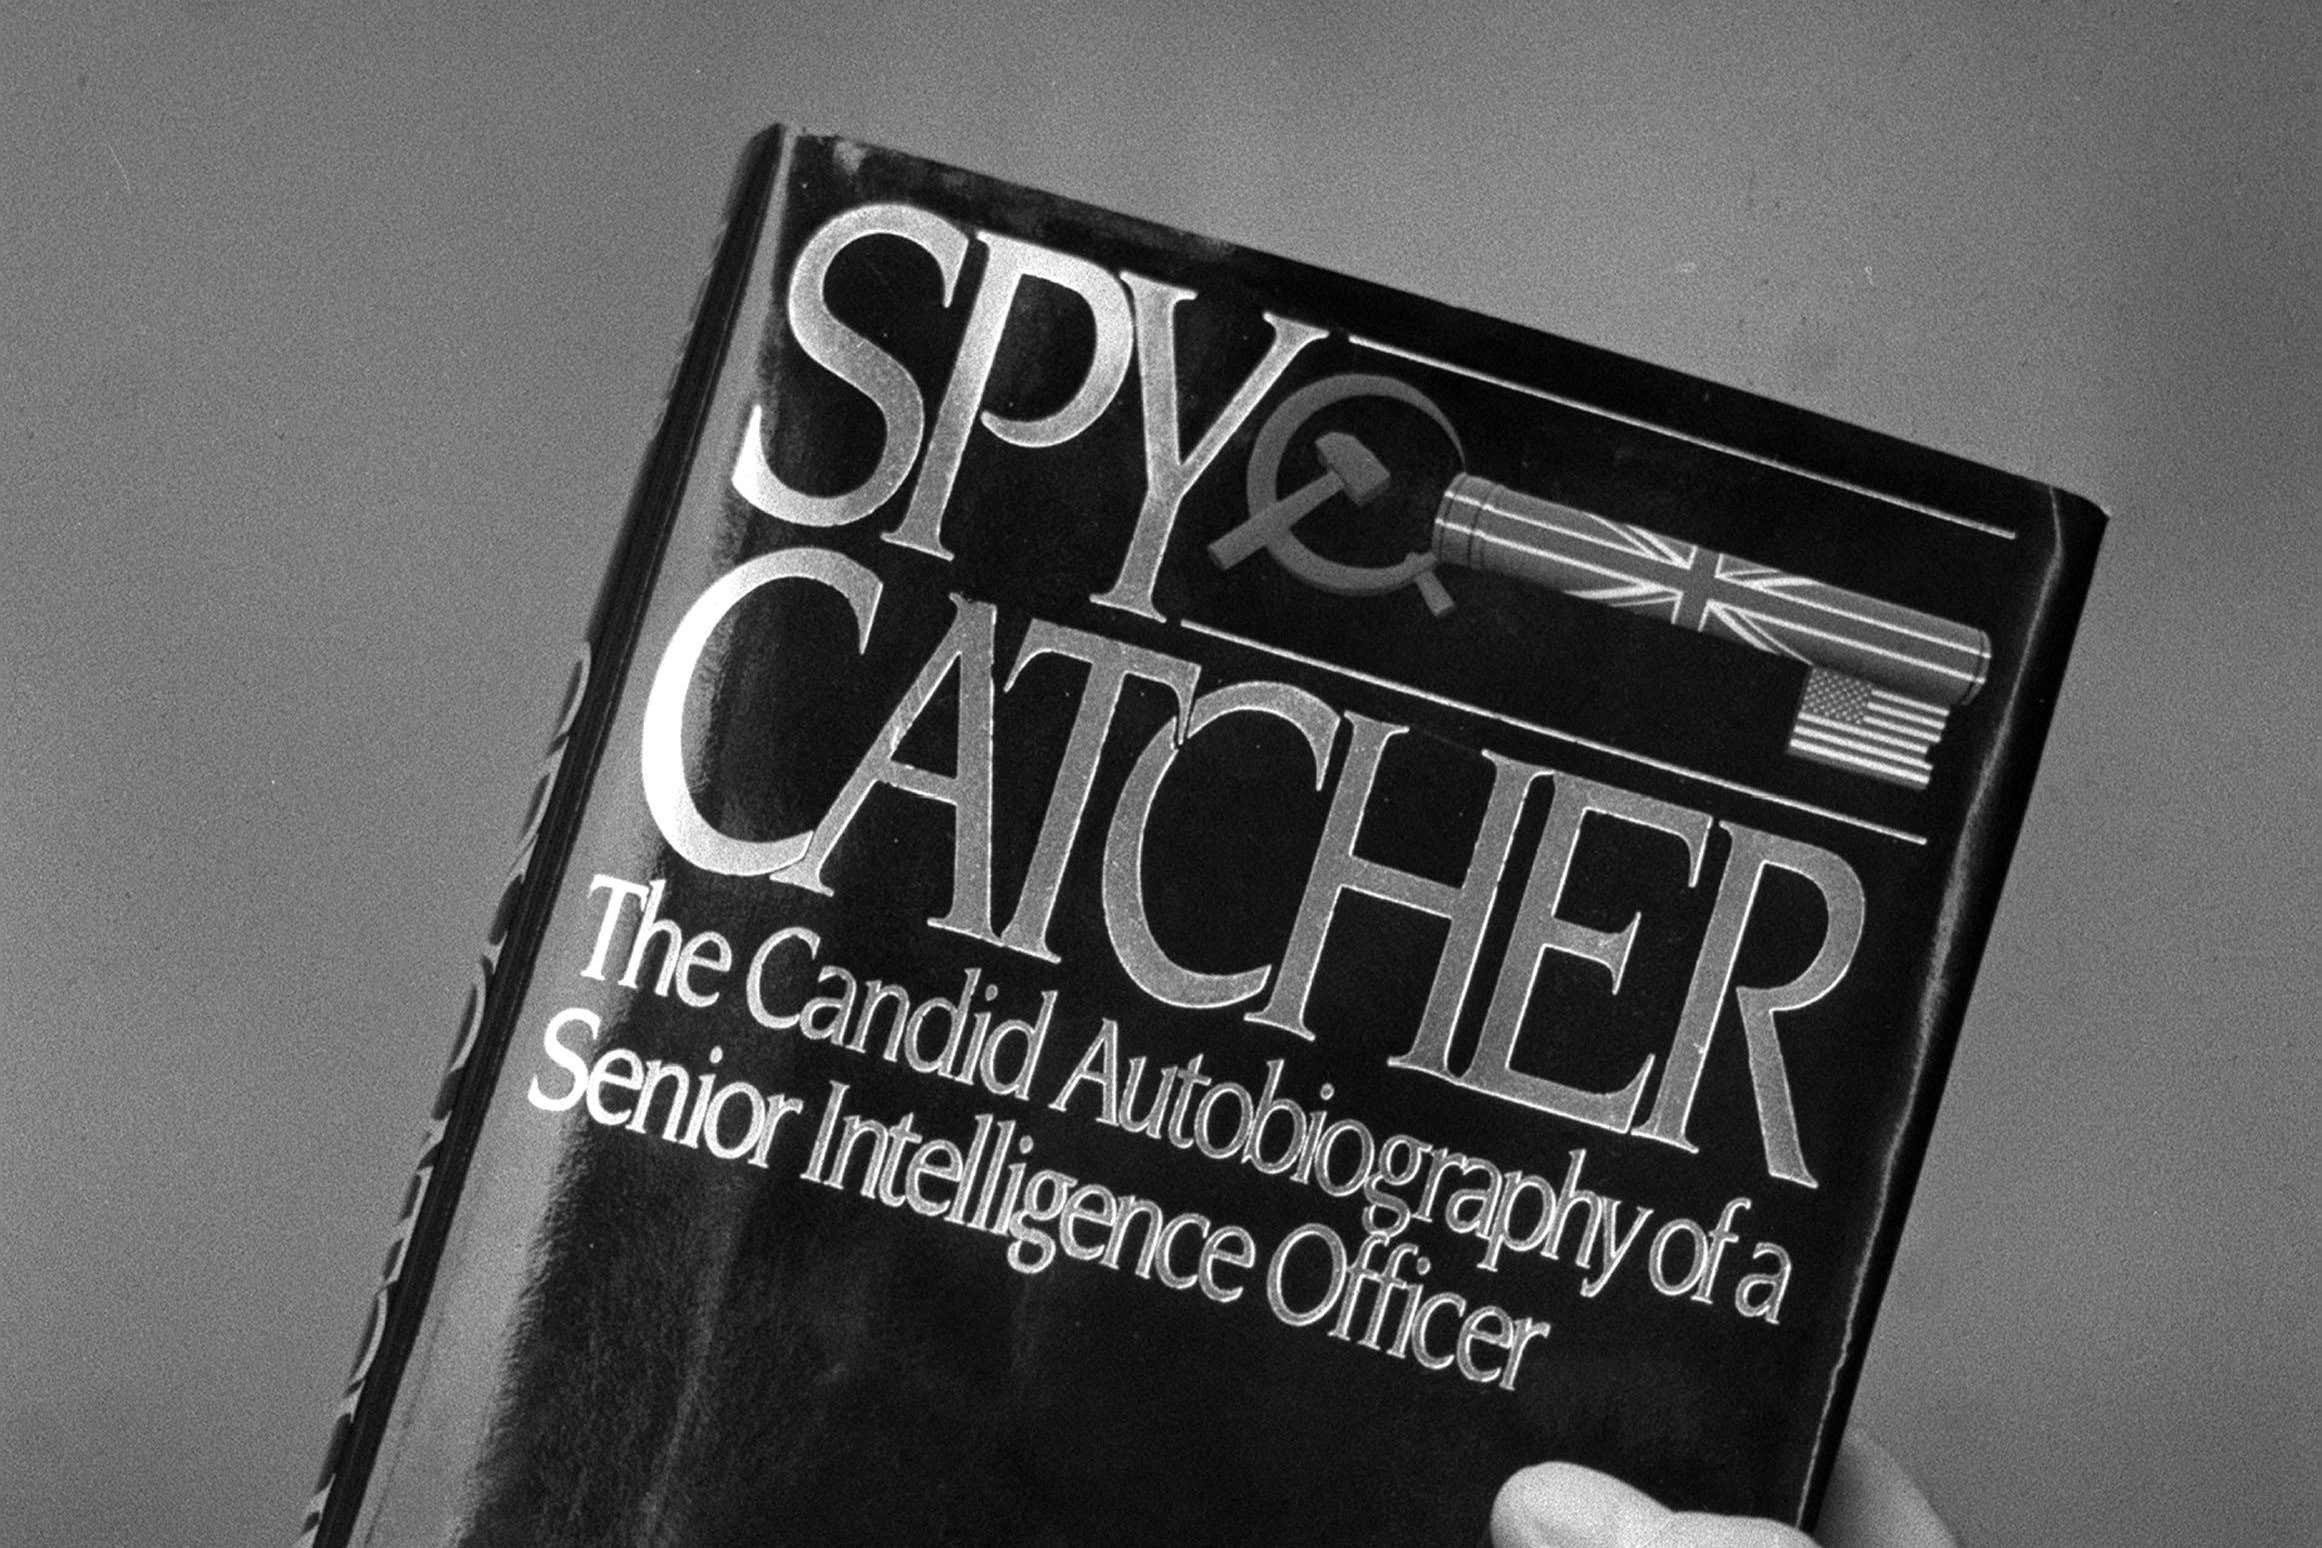 The front cover of Spycatcher by Peter Wright (PA)